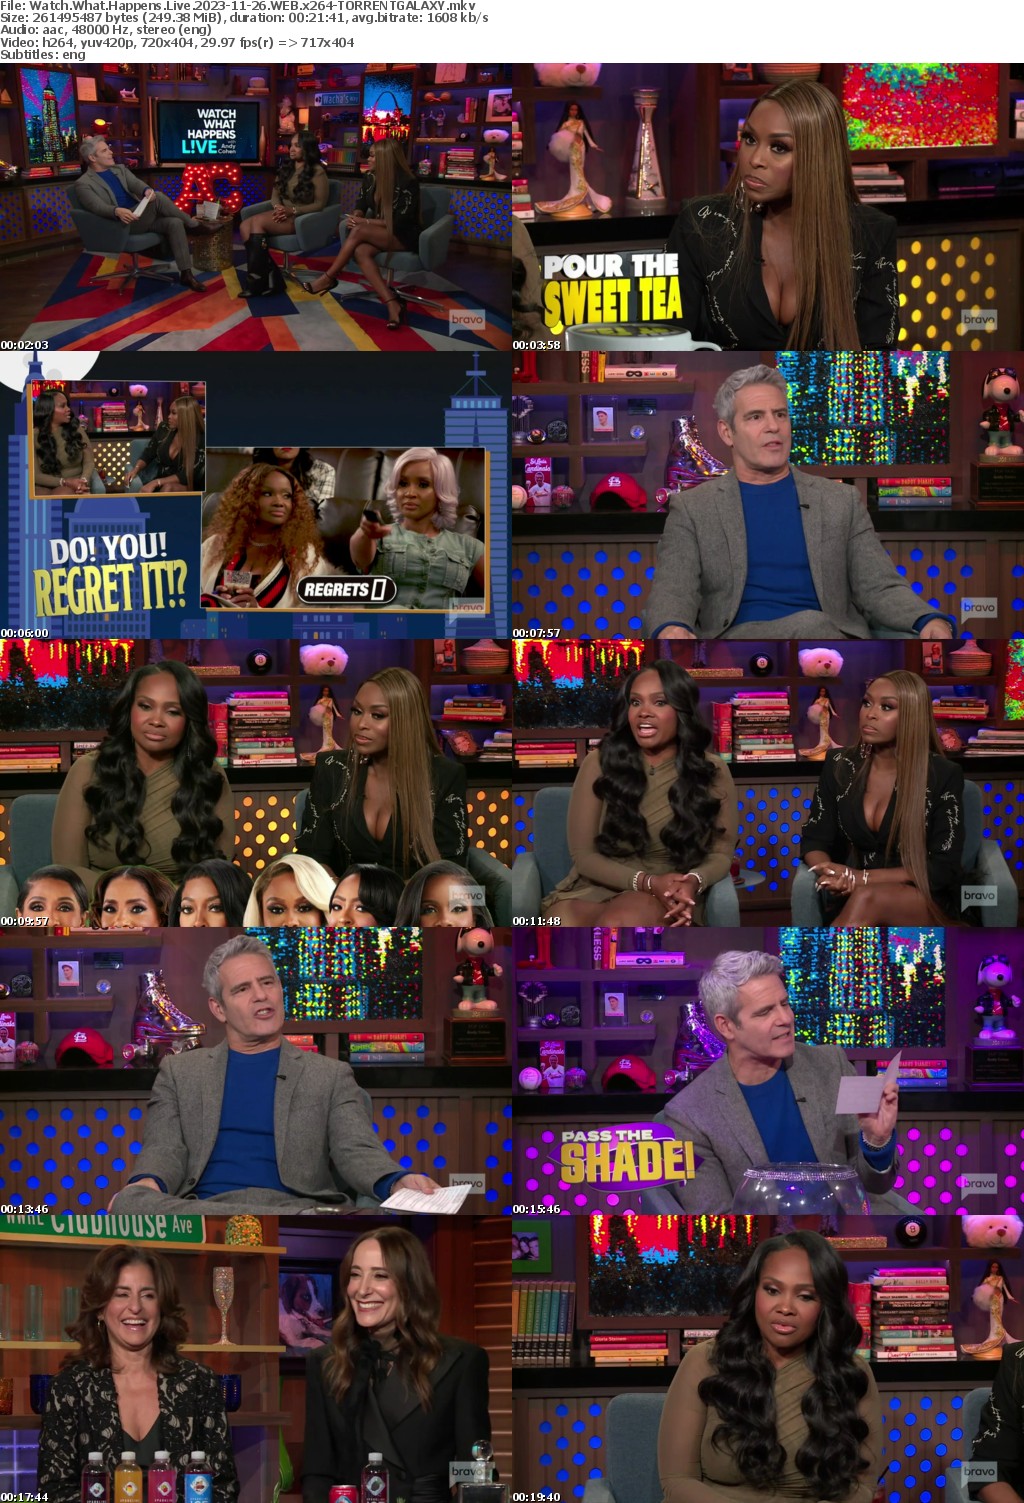 Watch What Happens Live 2023-11-26 WEB x264-GALAXY